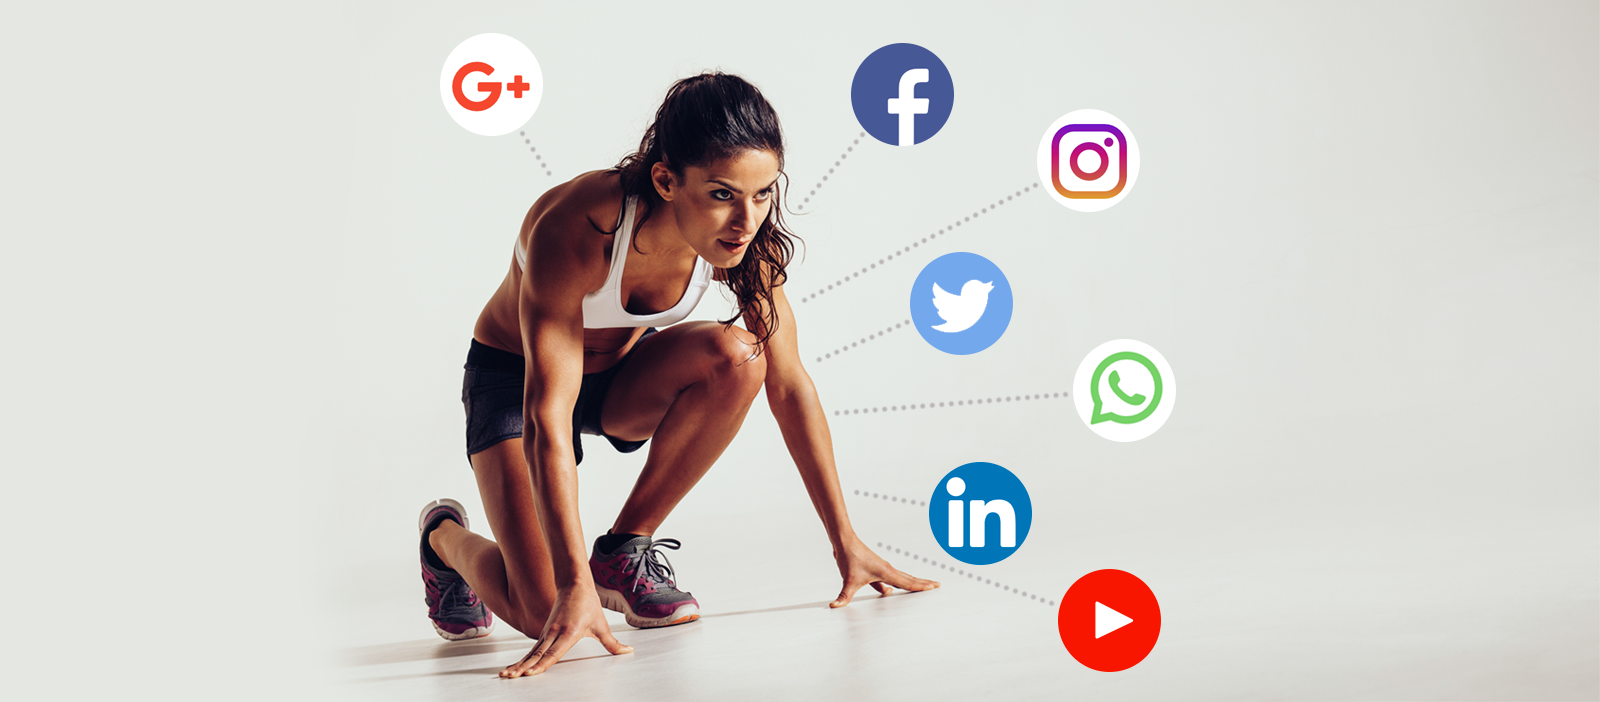 Why social media marketing is important for gym?